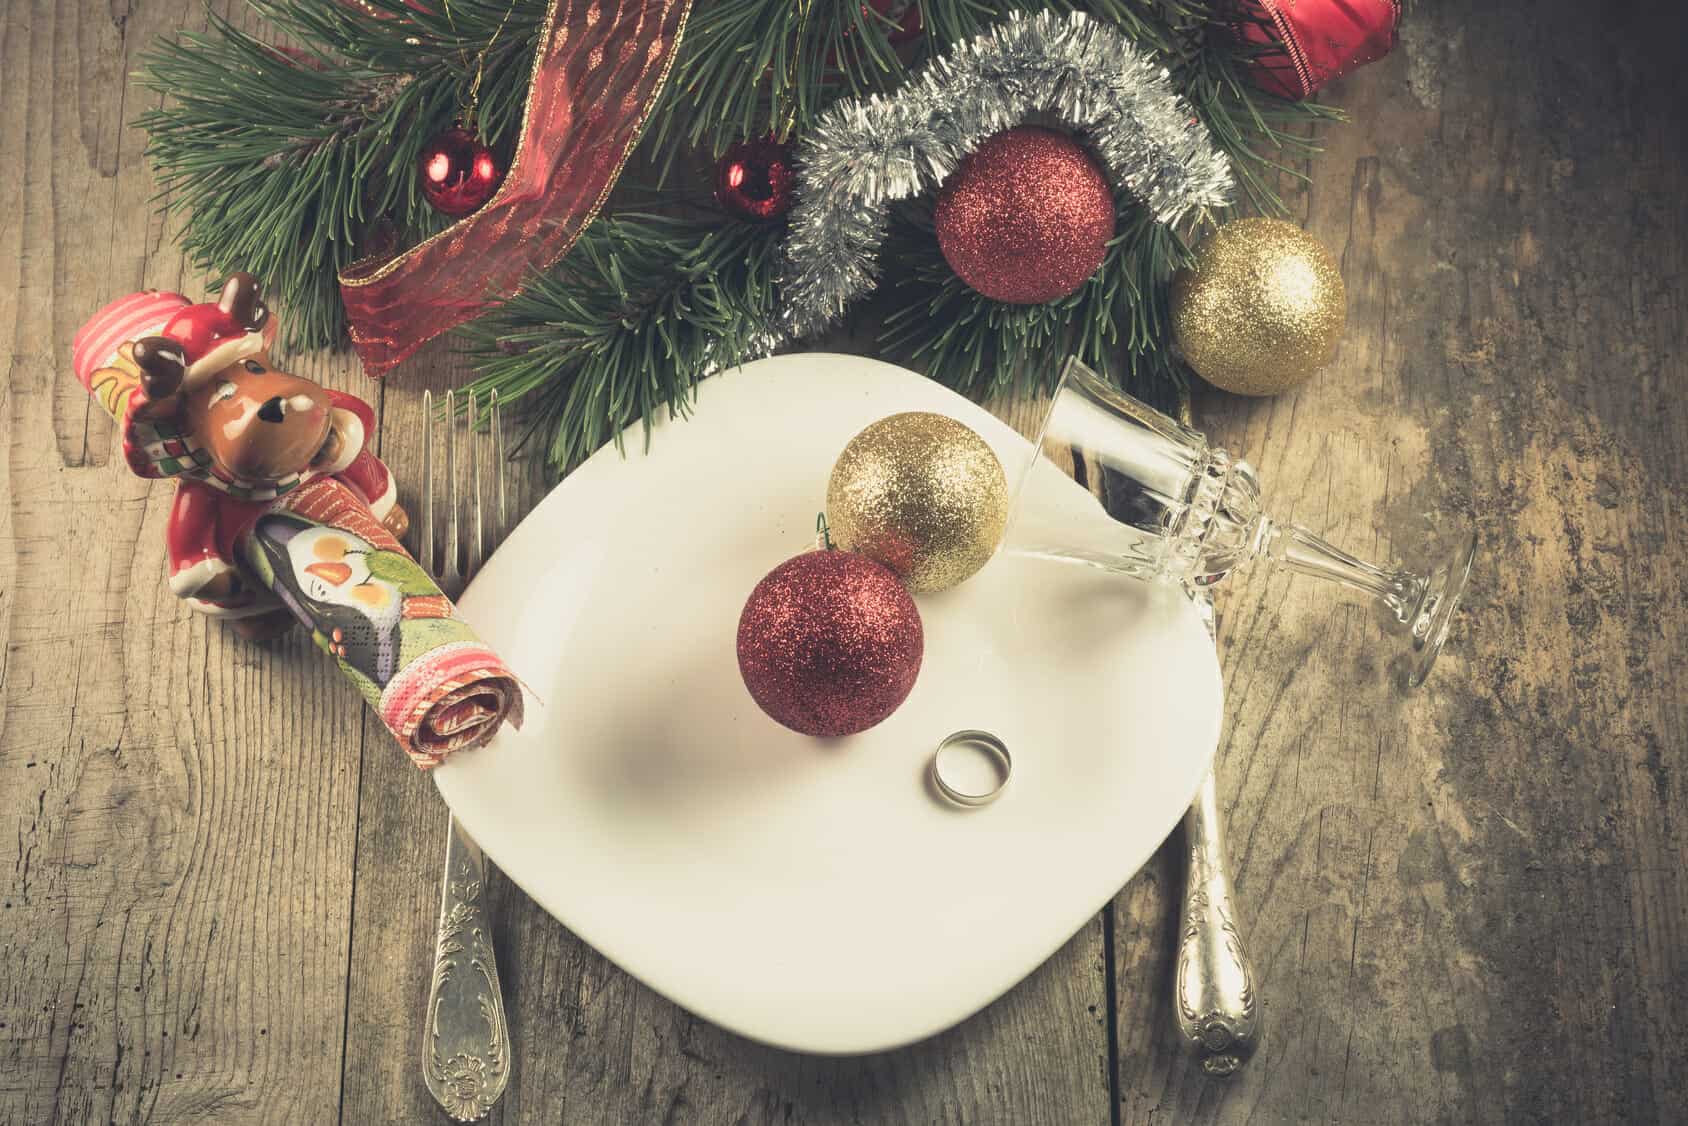 Christmas divorce shown by decorations on an empty dinner plate with a wedding ring on it